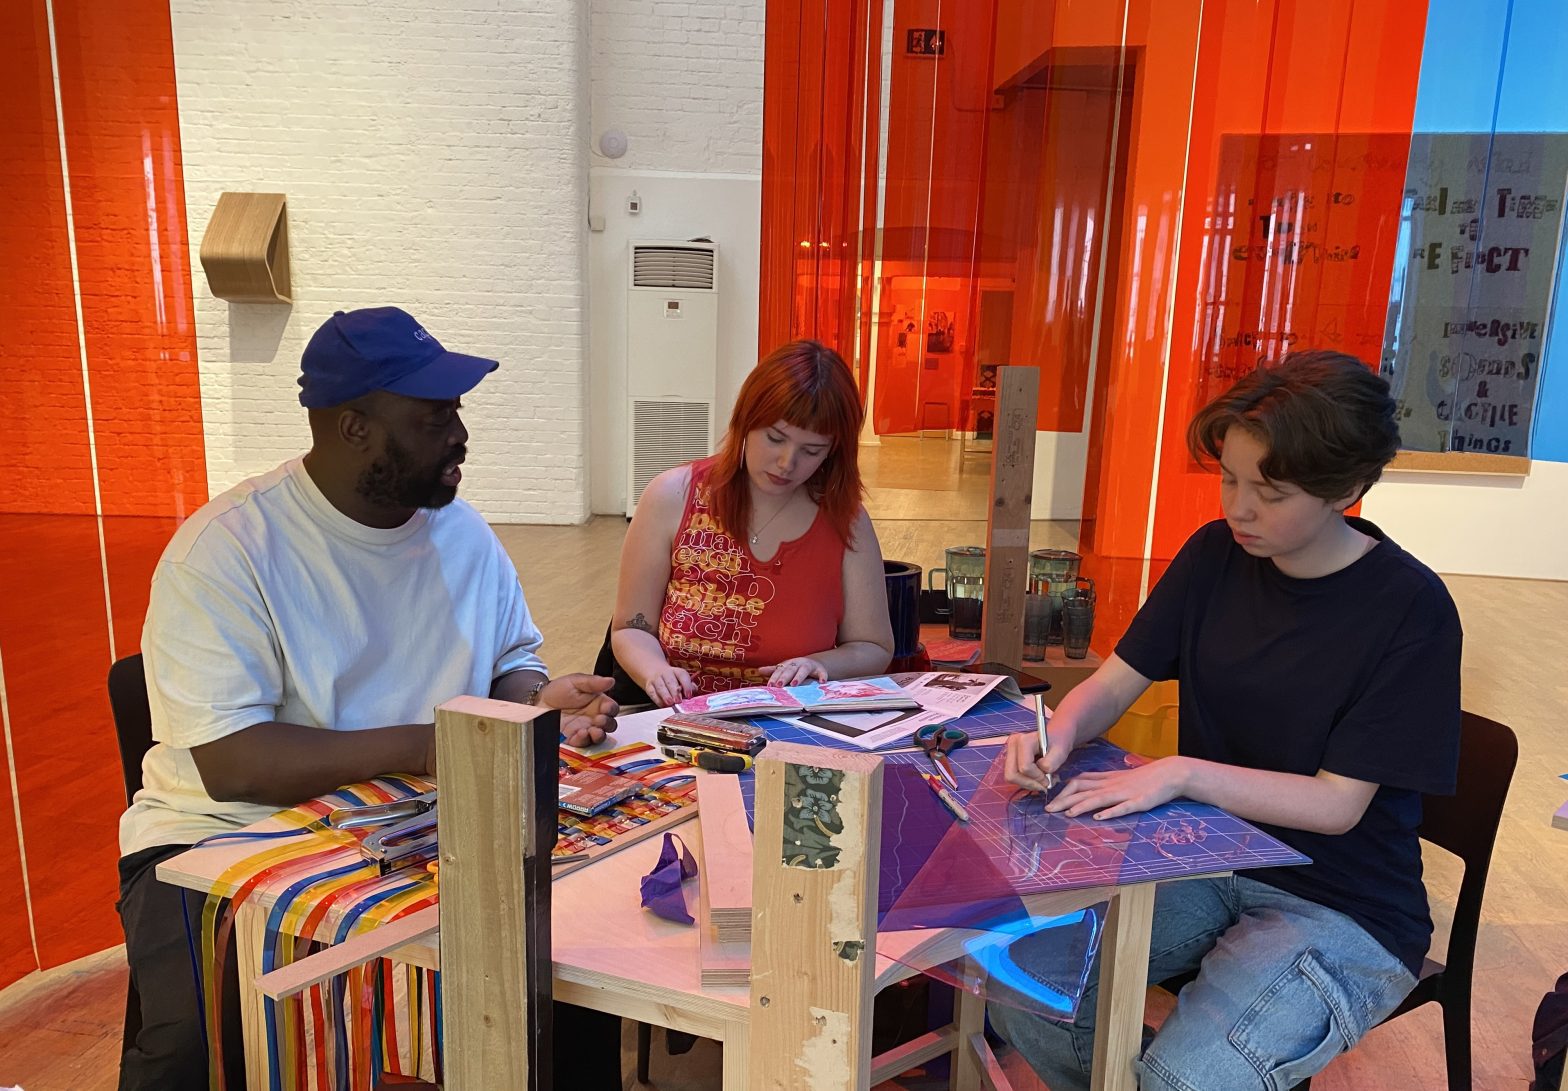 Three people sitting and working together at a table. Behind them coloured sheets of plastic hang down from the ceiling.